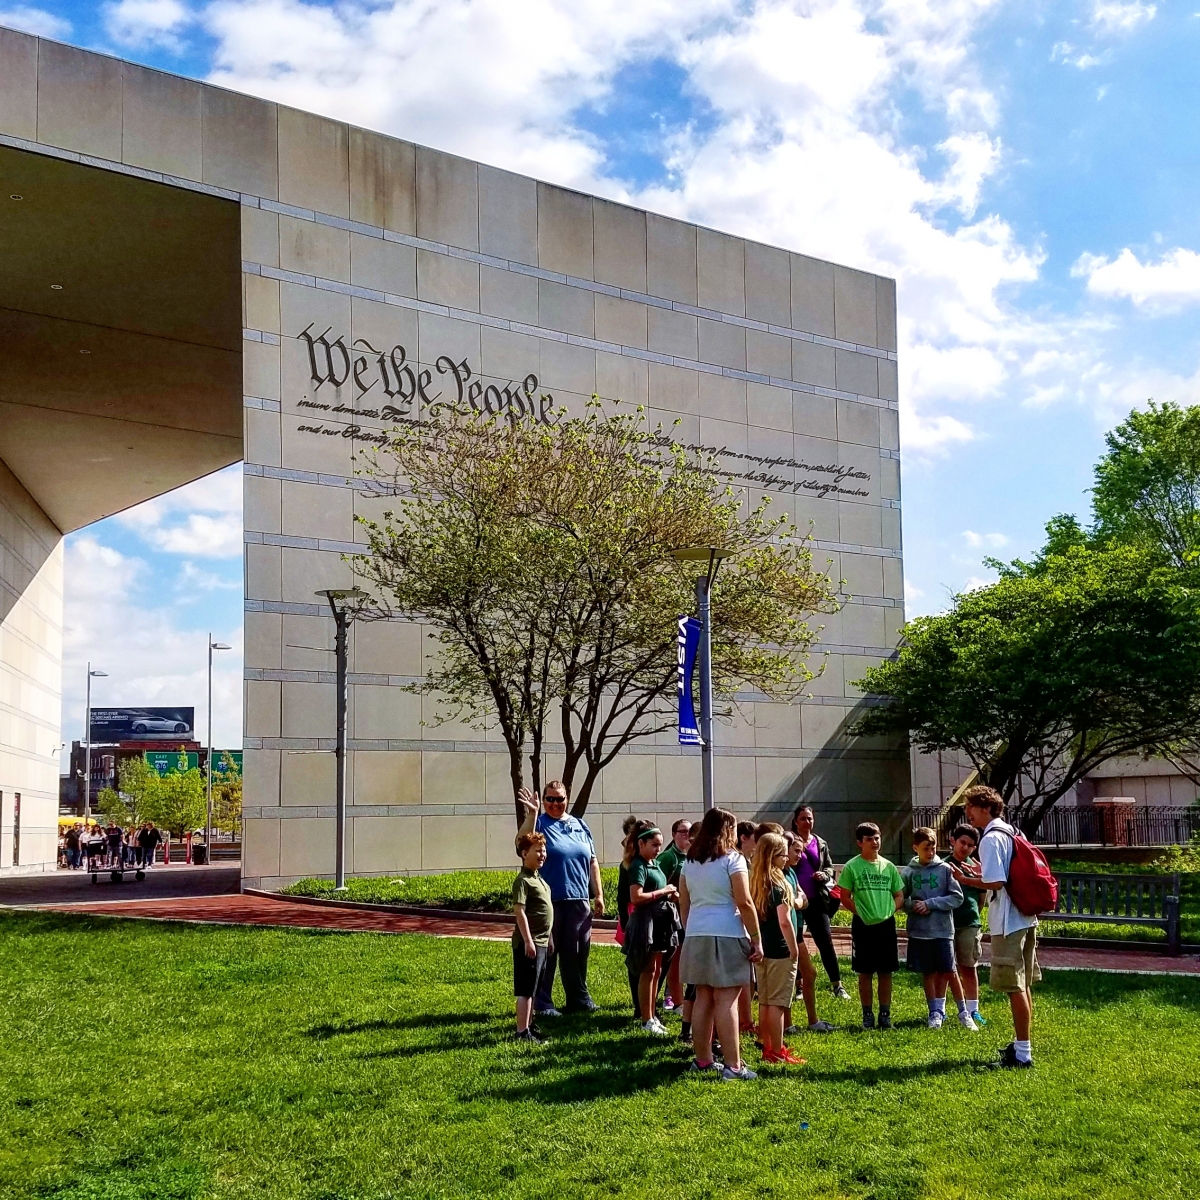 The Constitutional Walking Tour at The National Constitution Center